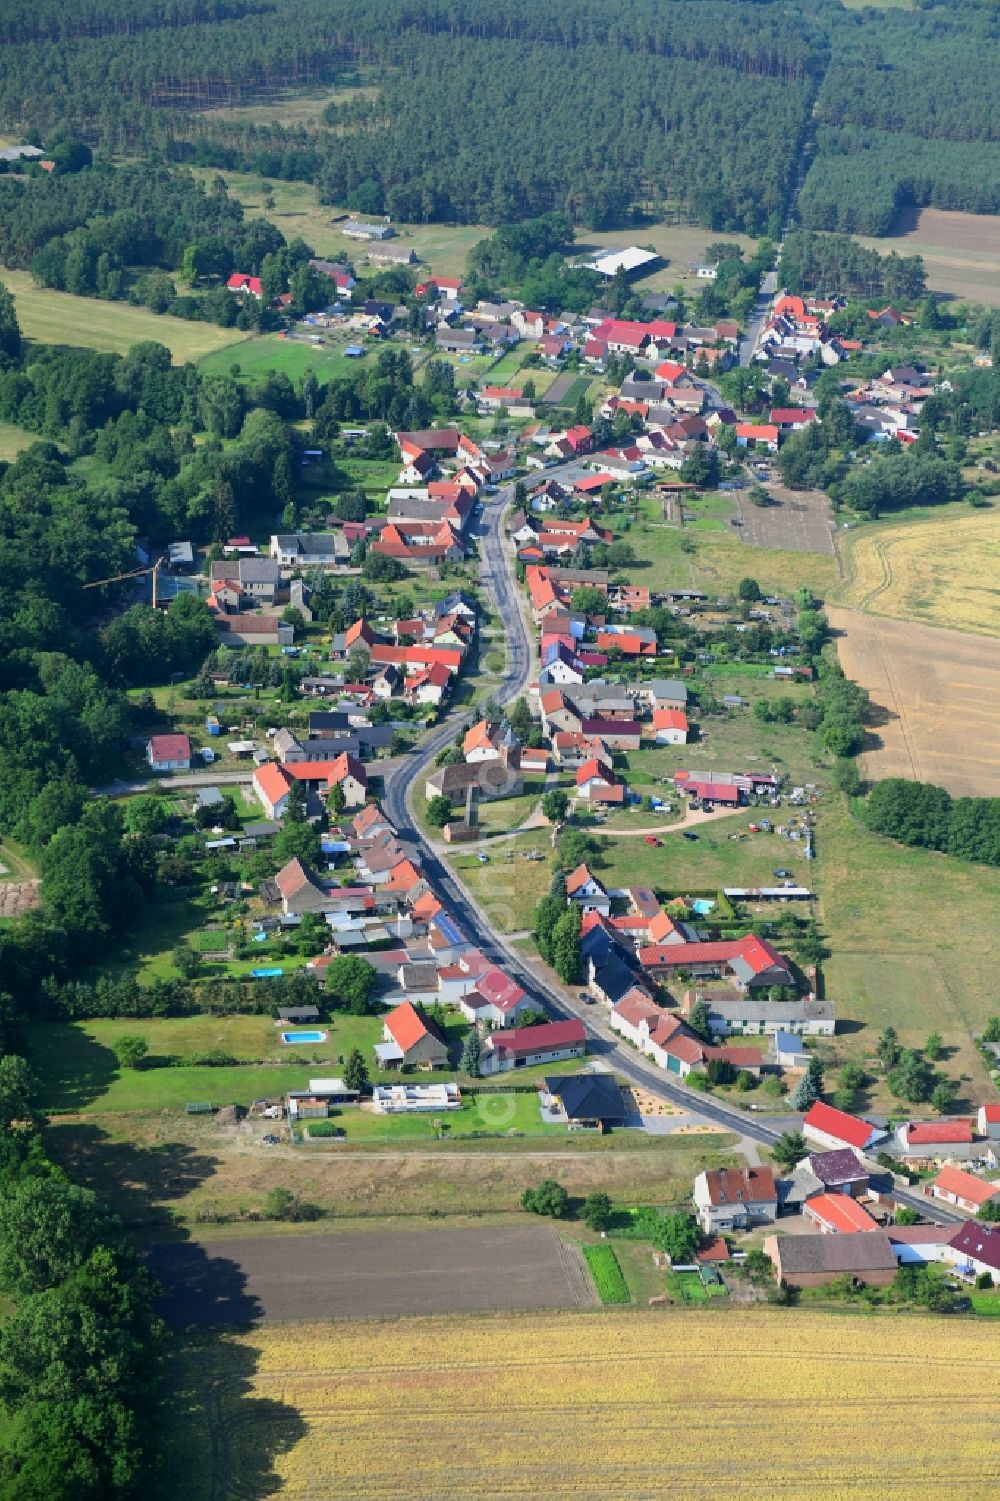 Gräben from above - Village - view on the edge of forested areas in Graeben in the state Brandenburg, Germany